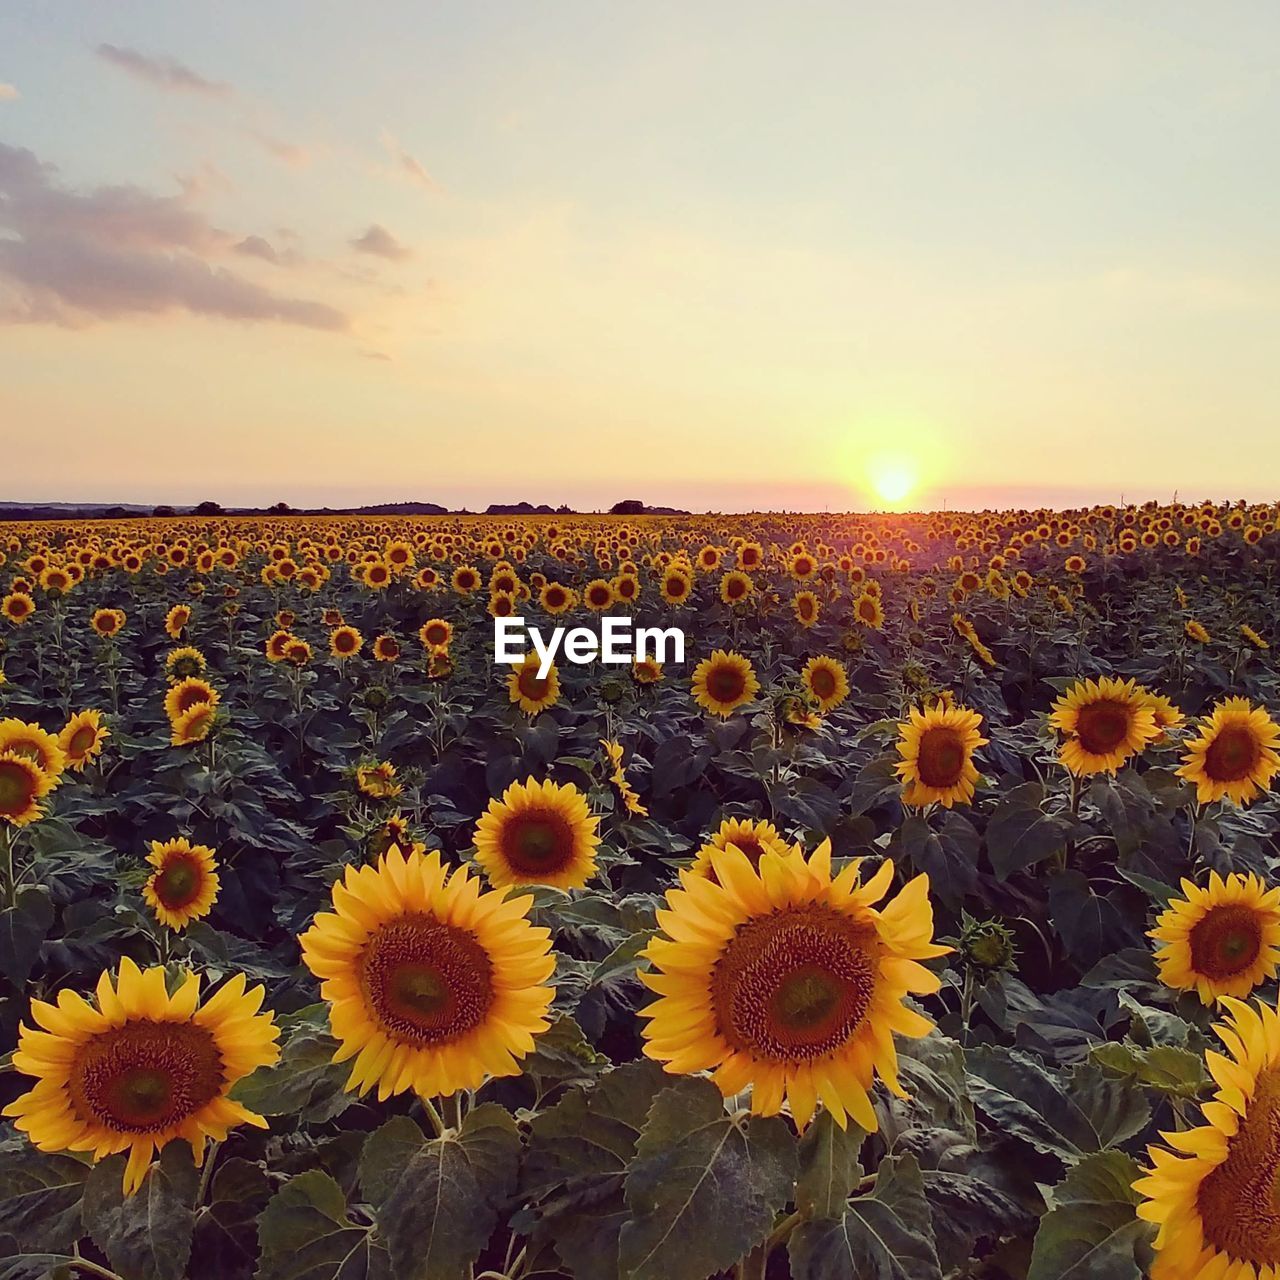 sky, plant, beauty in nature, flower, sunflower, nature, landscape, flowering plant, land, yellow, freshness, sunset, field, environment, growth, flower head, rural scene, scenics - nature, cloud, horizon, agriculture, sunlight, horizon over land, sun, tranquility, no people, fragility, inflorescence, tranquil scene, summer, petal, idyllic, urban skyline, abundance, outdoors, dramatic sky, gold, crop, farm, non-urban scene, sunbeam, close-up, vibrant color, copy space, backgrounds, day, multi colored, dusk, travel, botany, wildflower, travel destinations, springtime, sunny, back lit